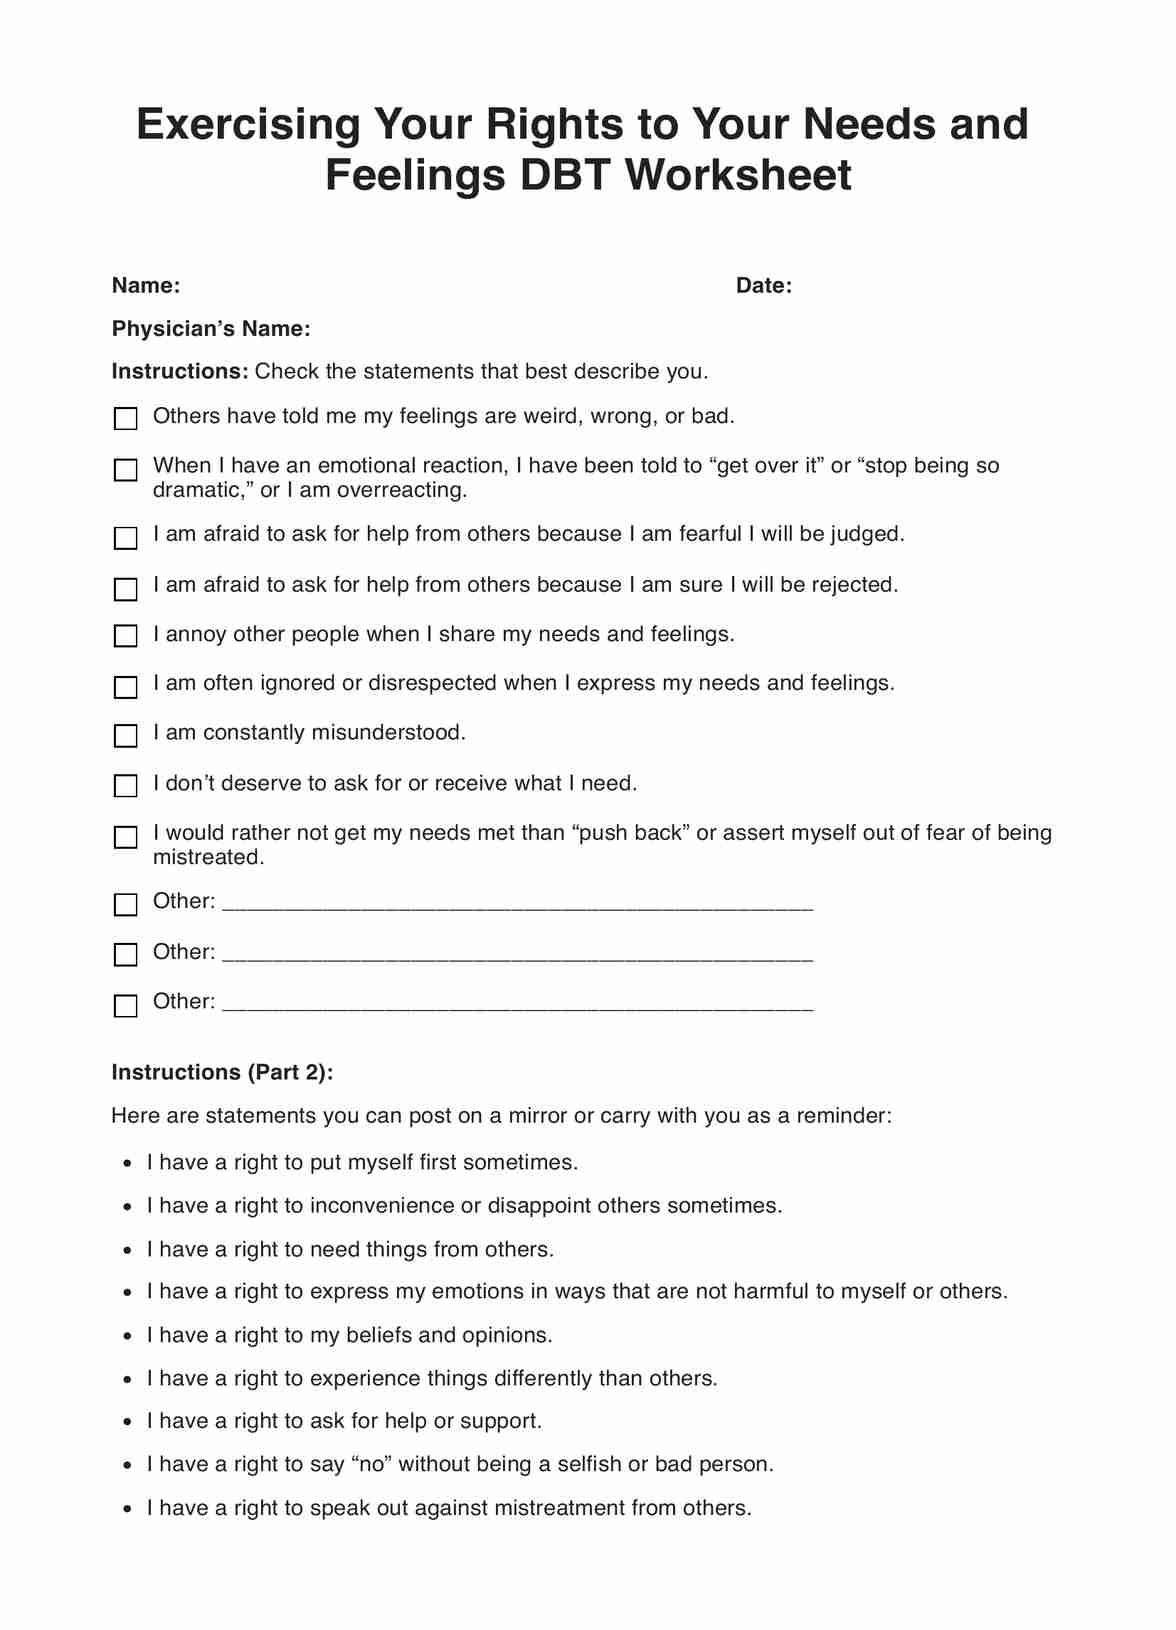 Exercising Your Rights to Your Needs and Feelings DBT Worksheet PDF Example